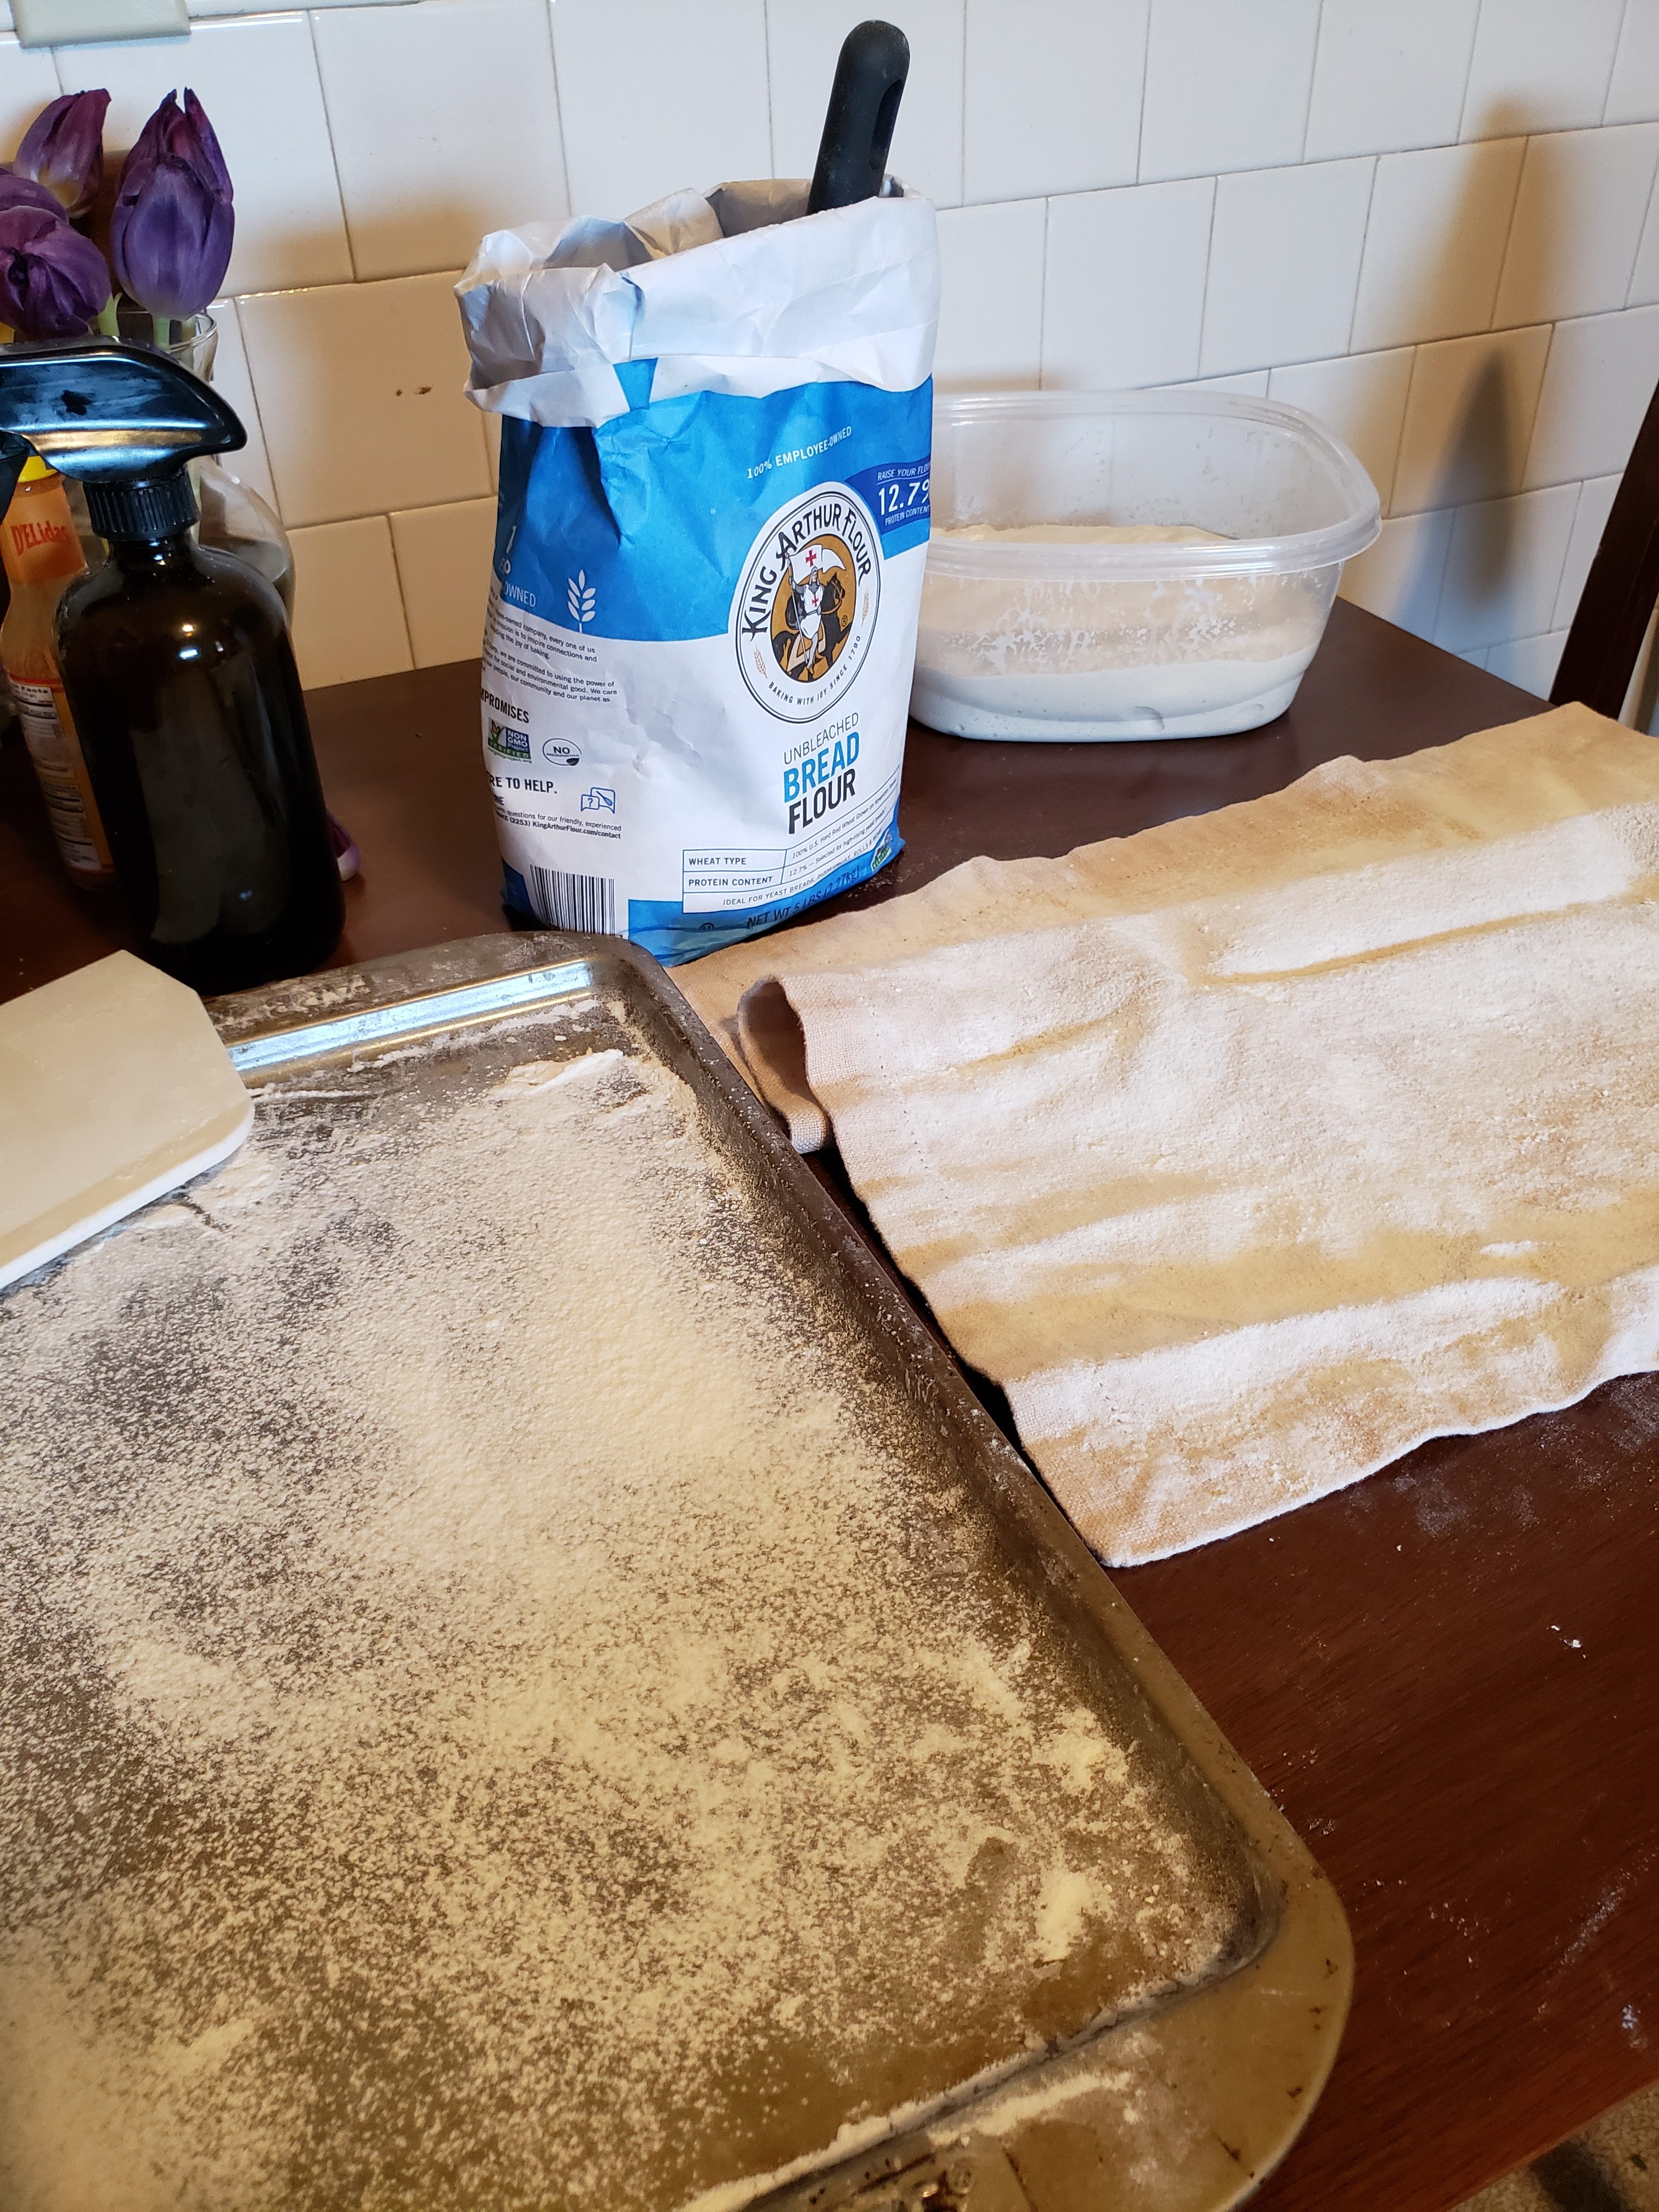 Floured surface on top of a baking sheet (testing the idea but it makes the space too small). Ciabatta dough and floured kitchen towel.